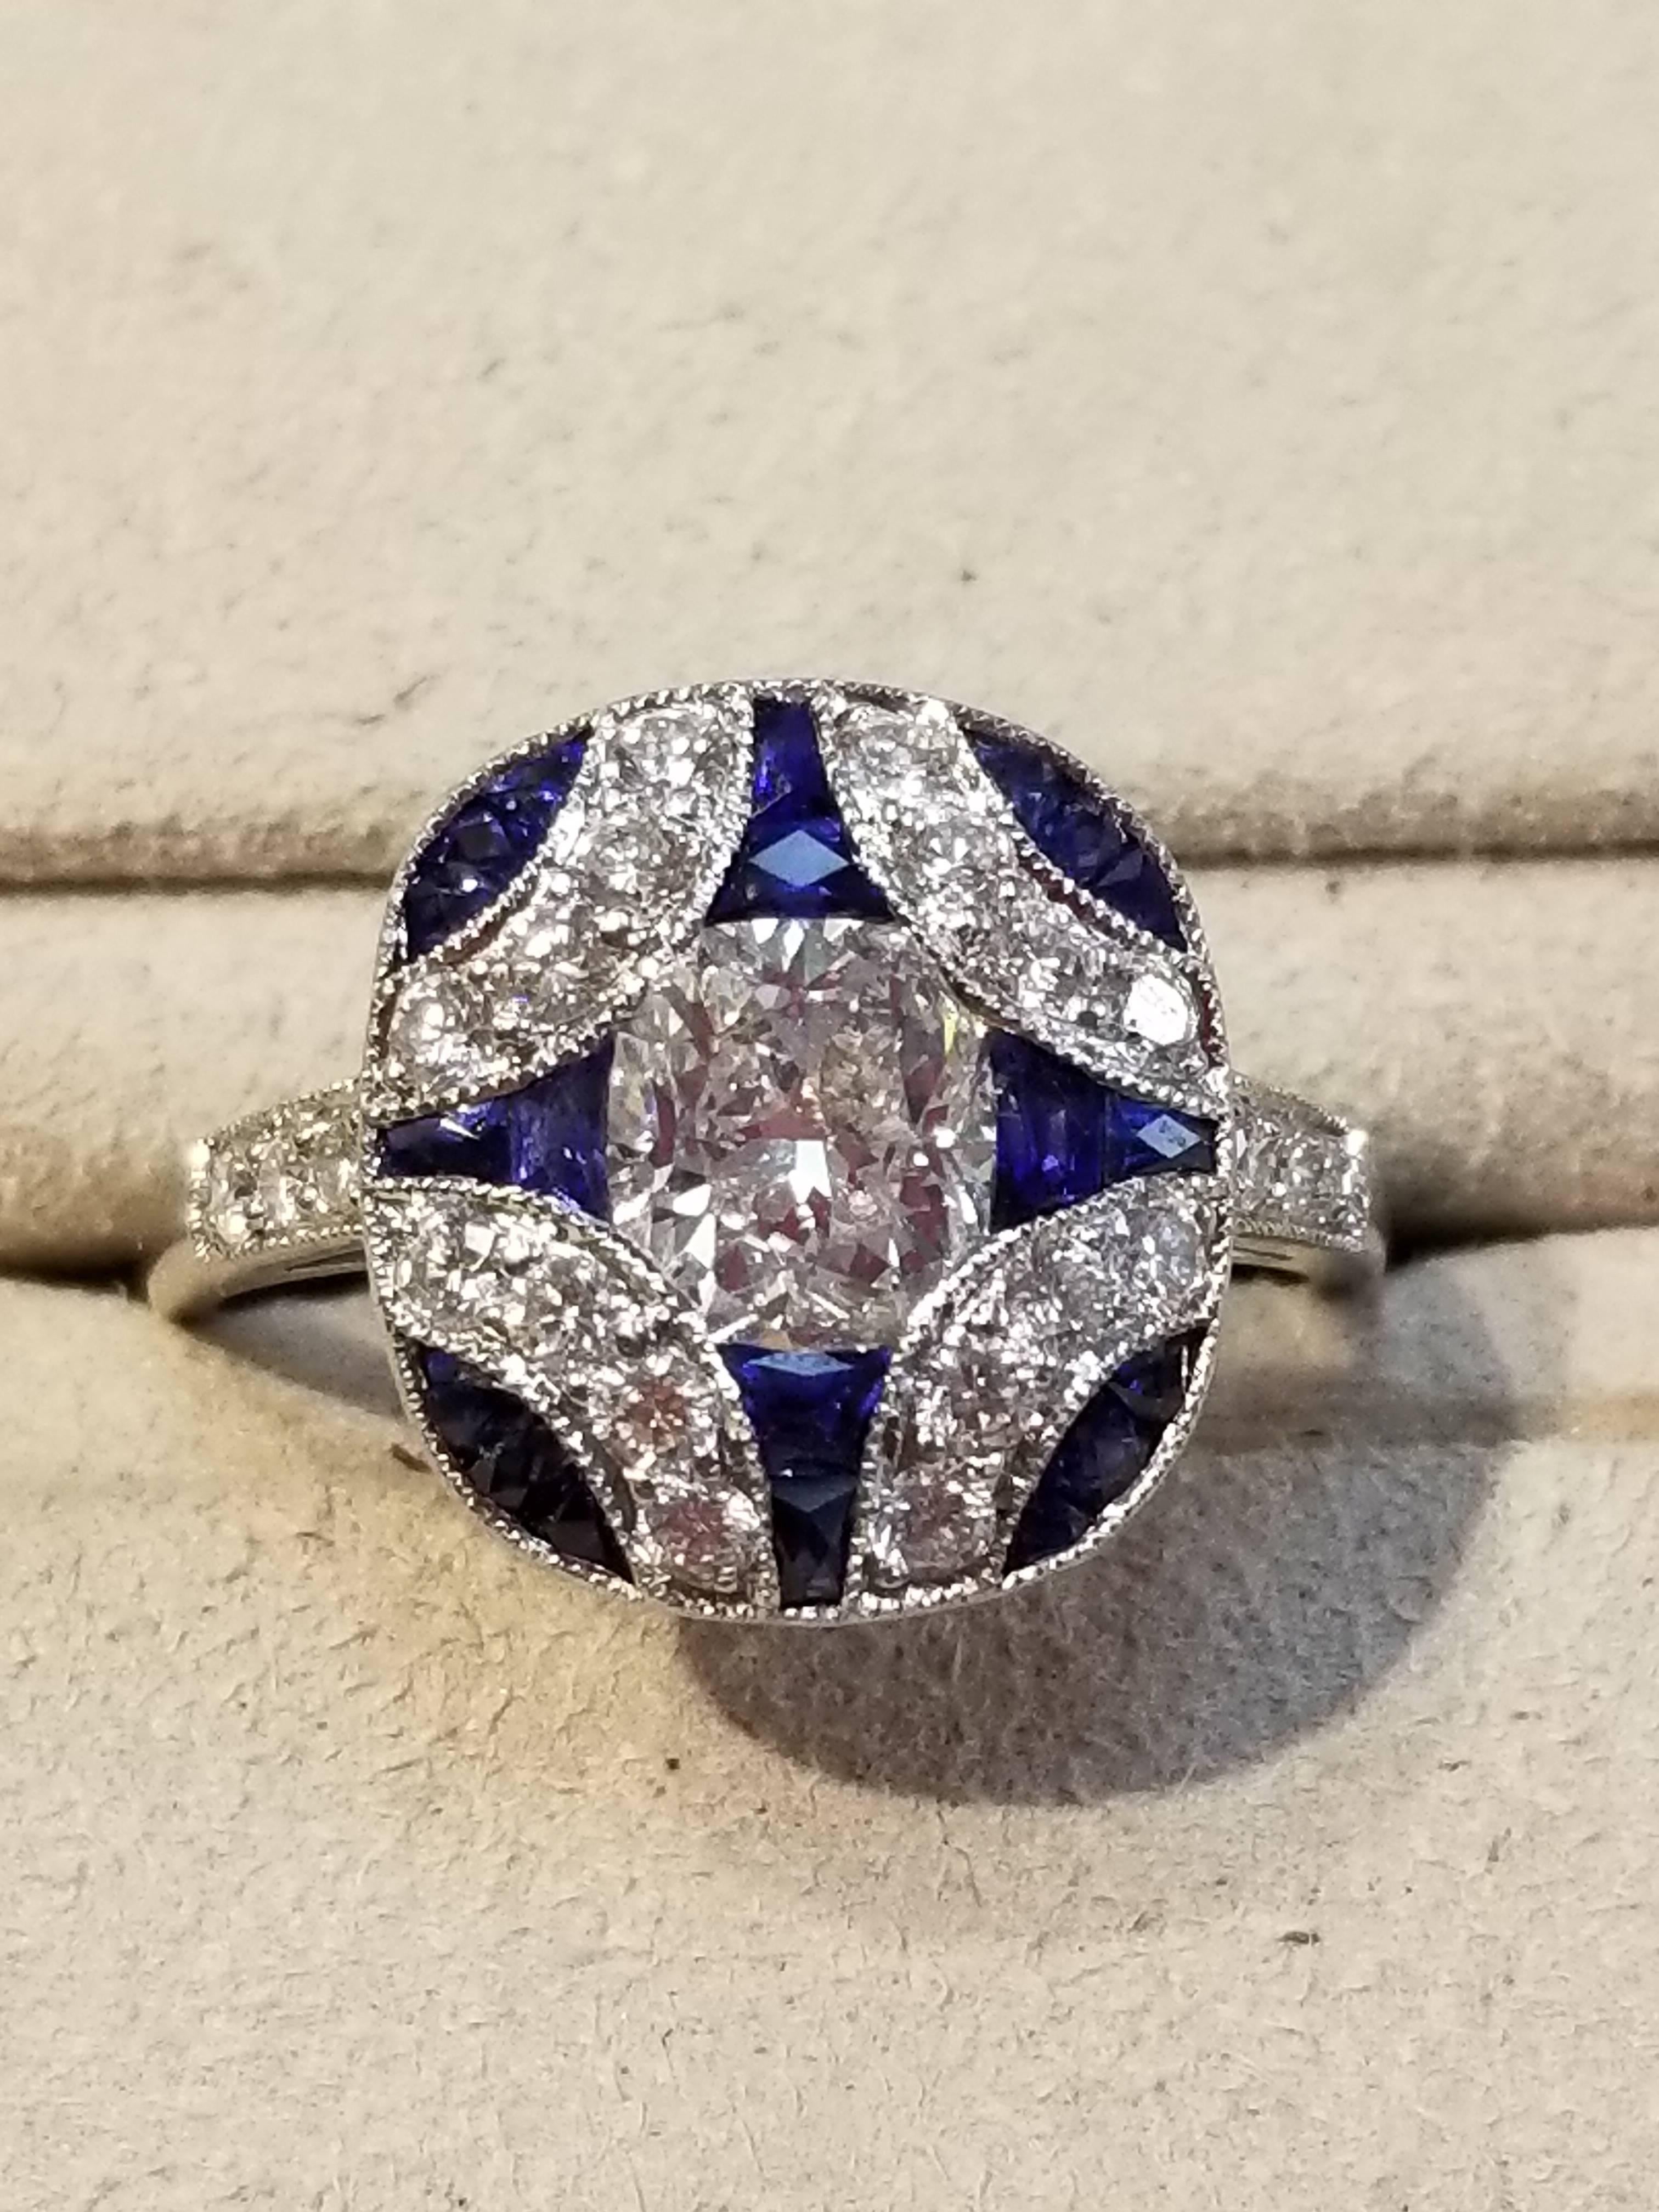 Platinum diamond and sapphire ring, size 6 1/2. The center diamond weighs 1.05 carats and the surrounding diamonds weigh 0.52 carats and are of FG color and VS1 clarity. The sapphires weigh a total of 1.36 carats. Art Deco style.